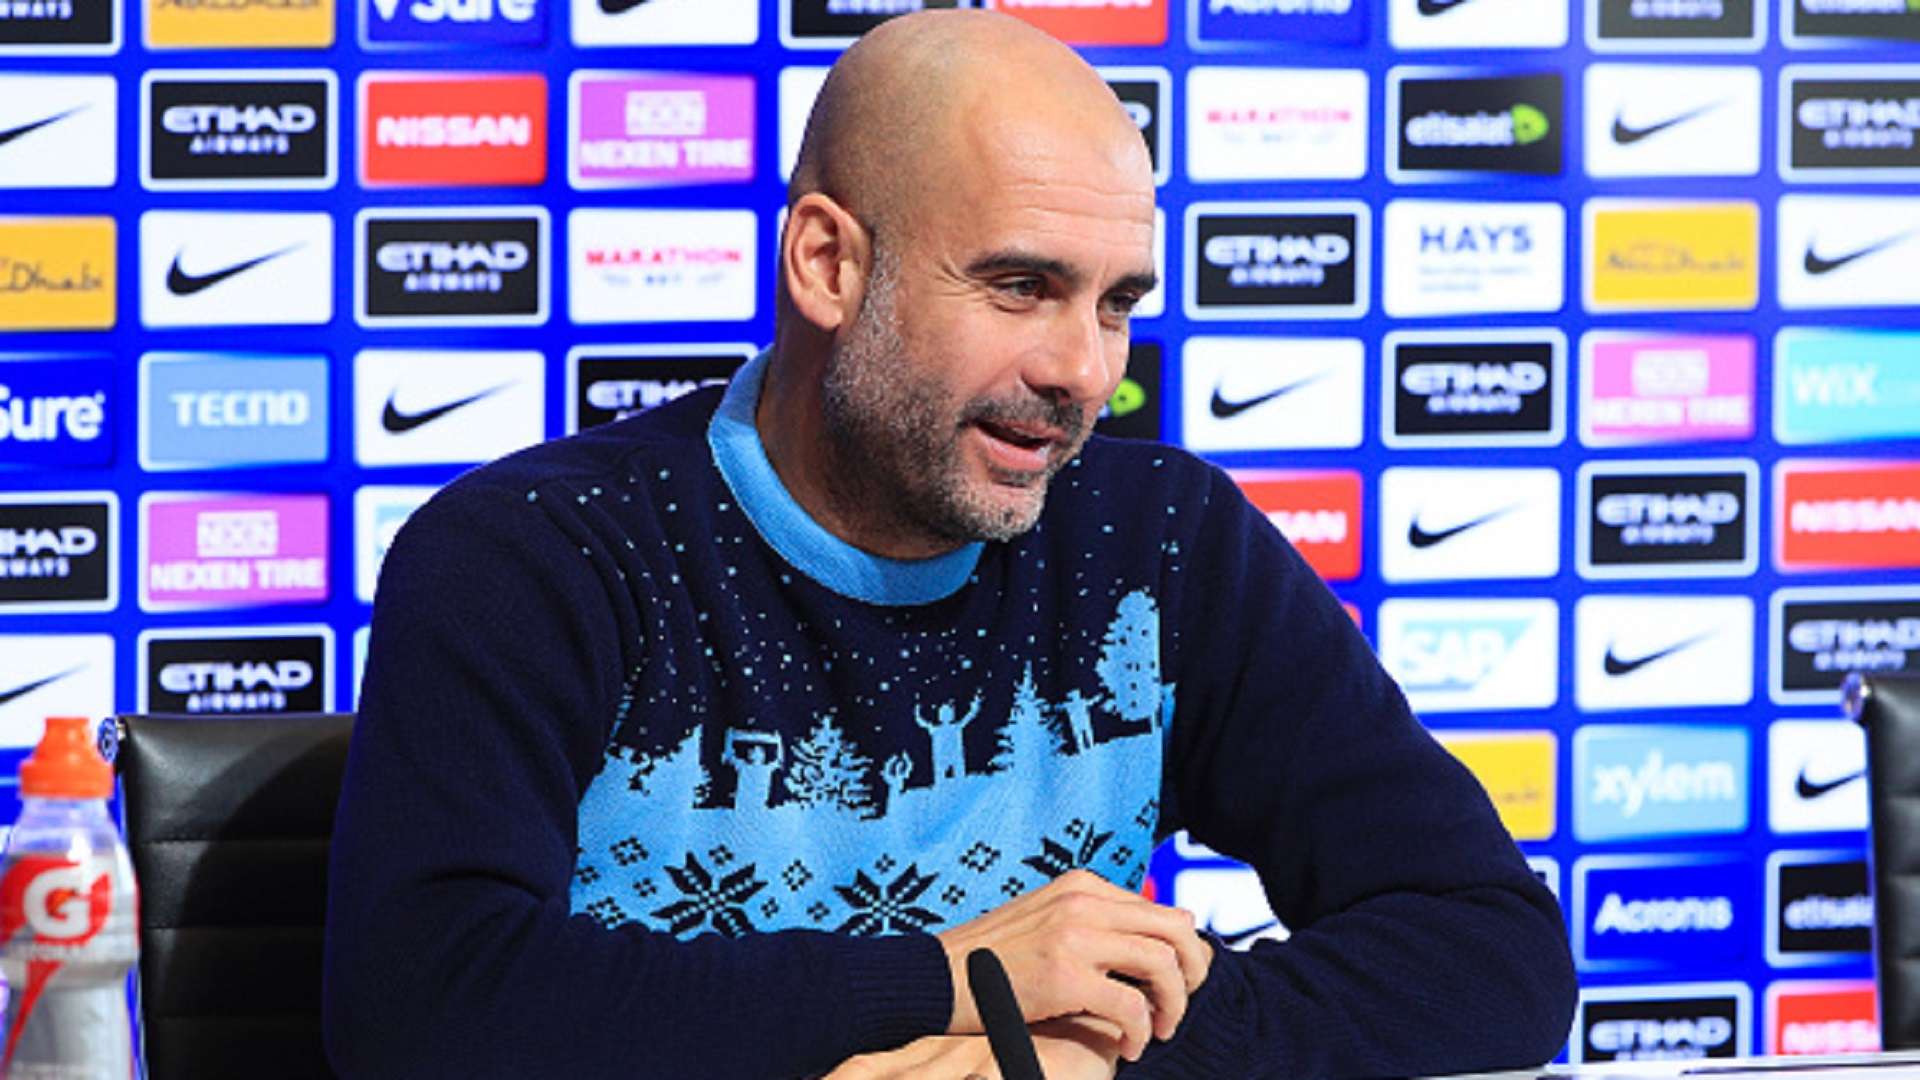 Pep Guardiola, manager of Manchester City speaks to the media during the press conference at Manchester City Football Academy on December 14, 2018 in Manchester, England